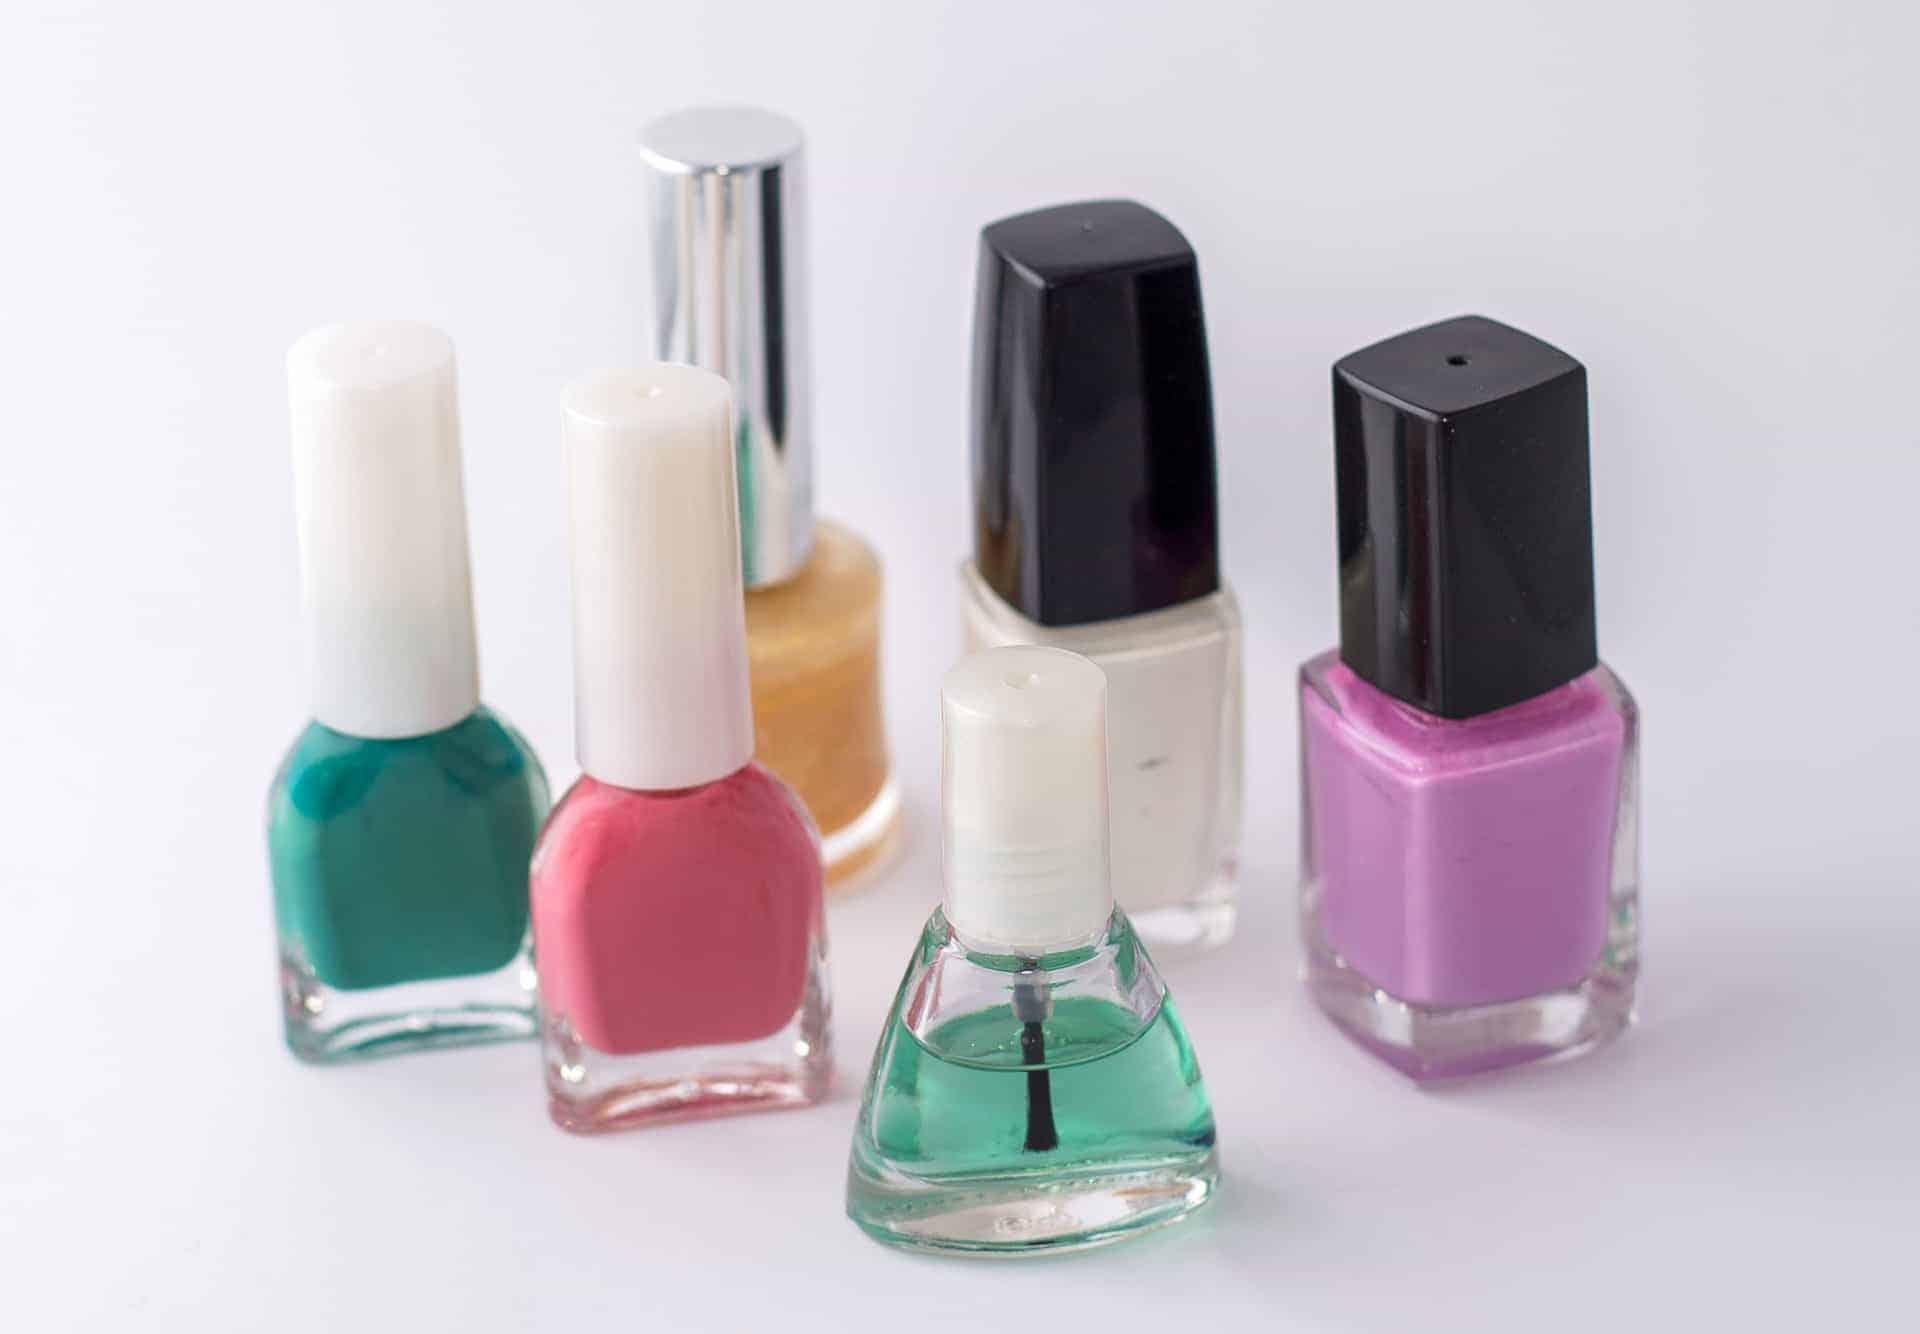 3. "Pregnancy-Safe Nail Polish: What to Look For" - wide 9